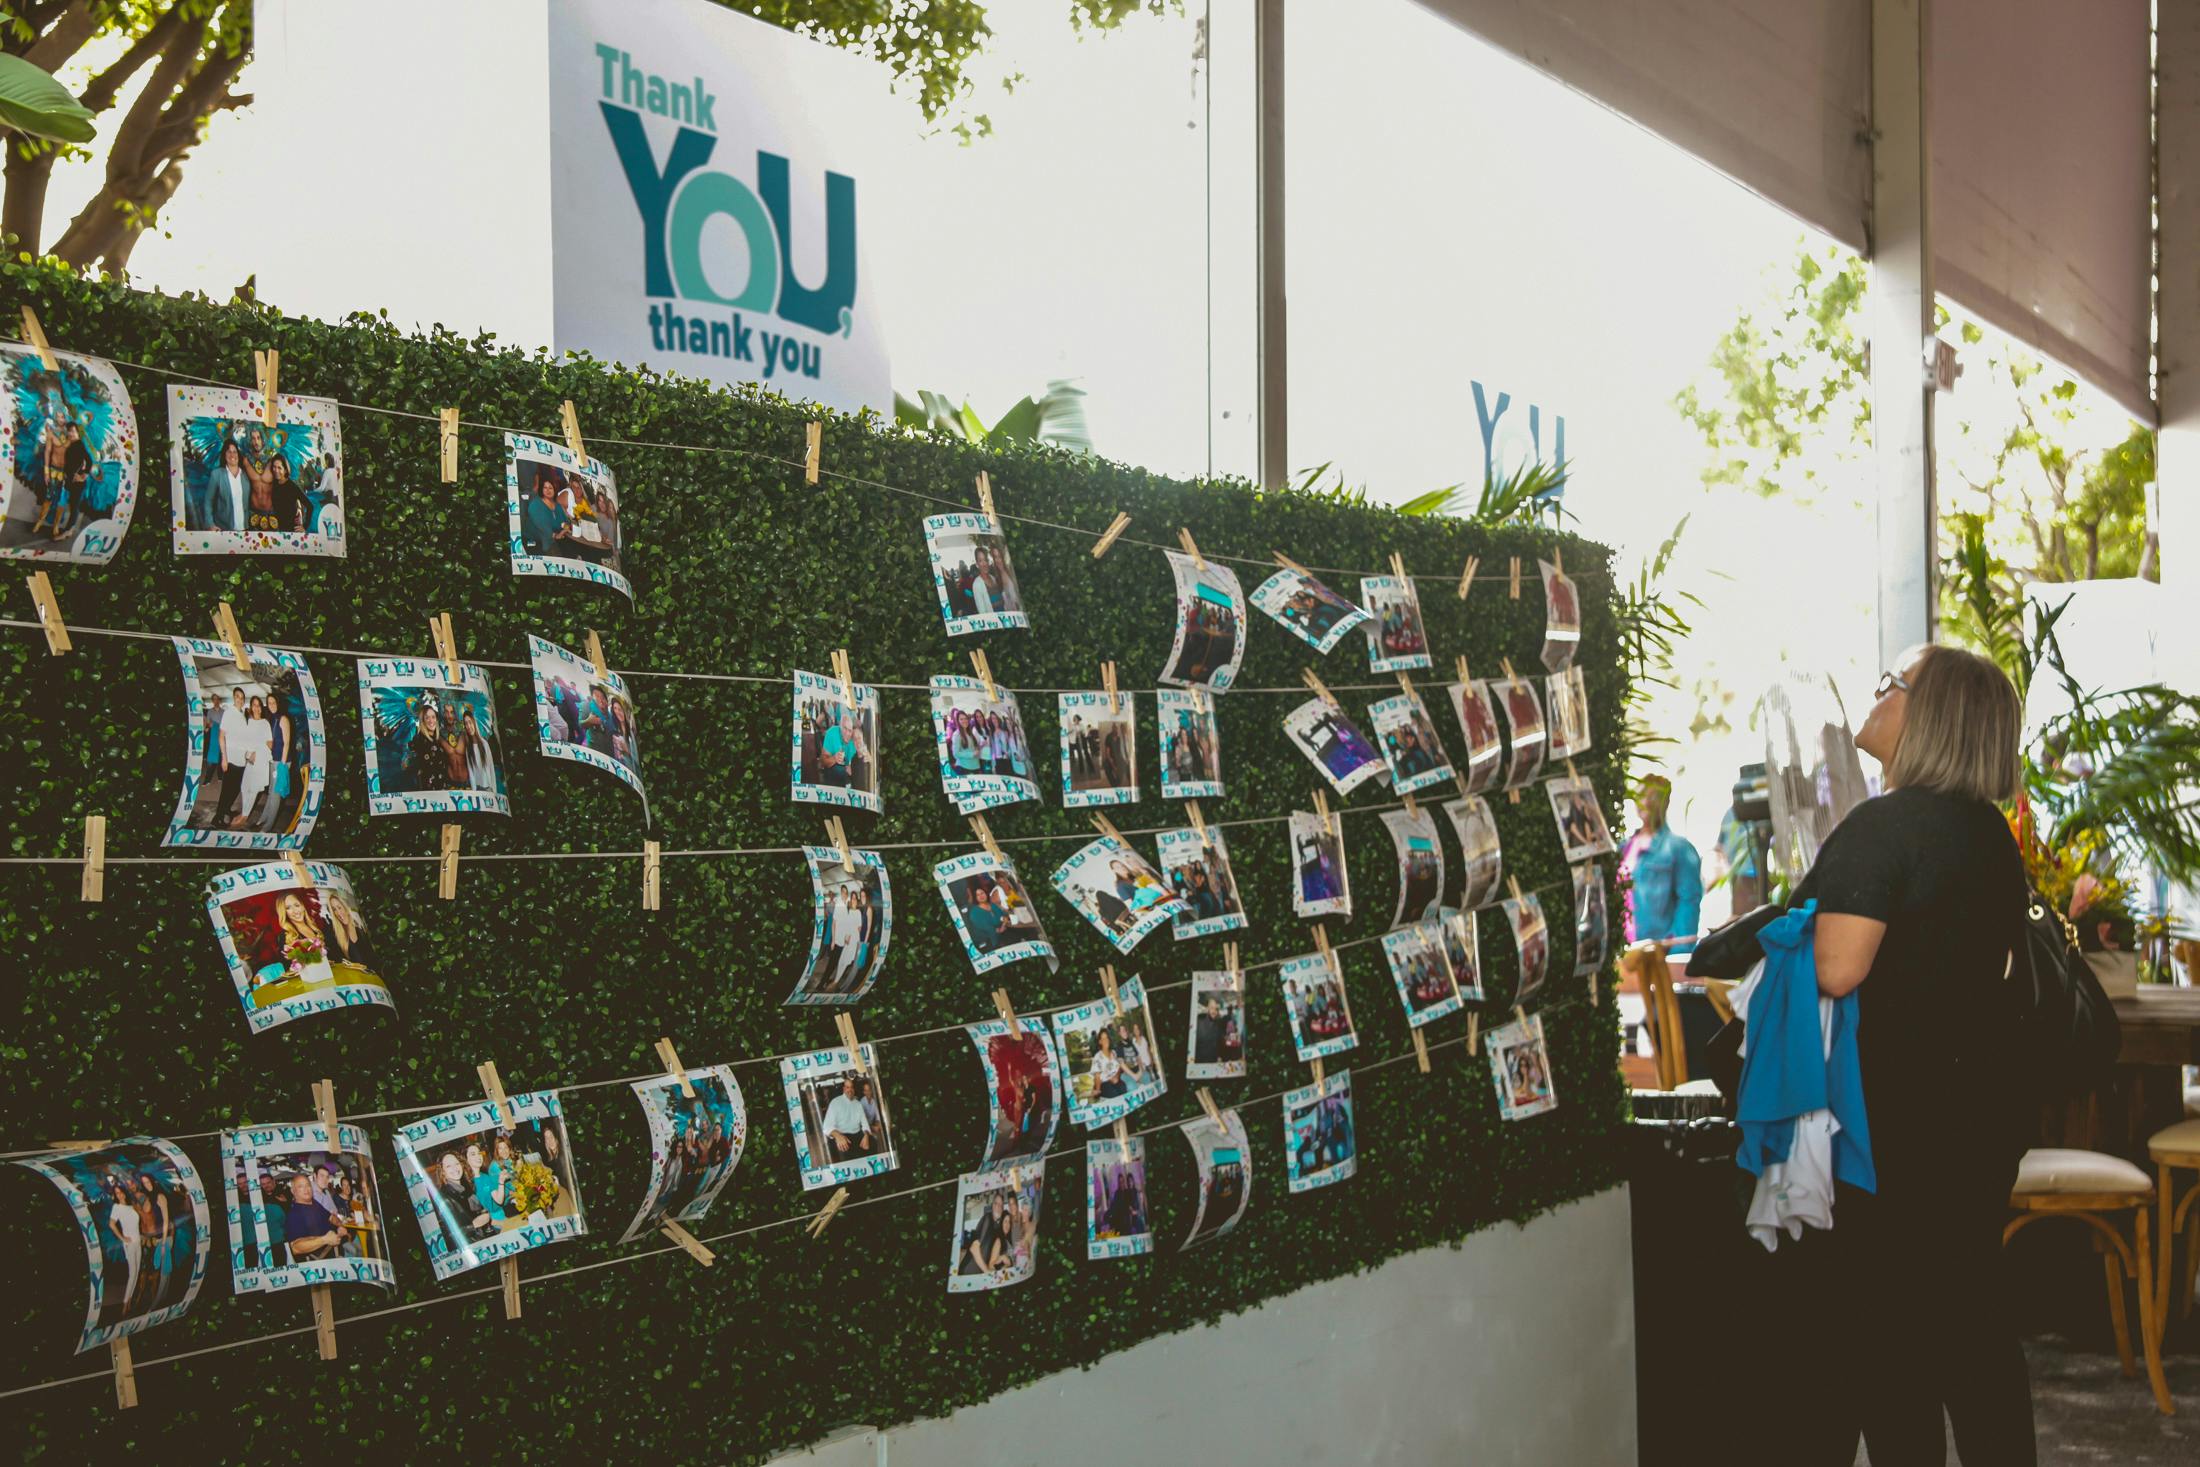 Find your photo wall covered in greenery at corporate event | PartySlate